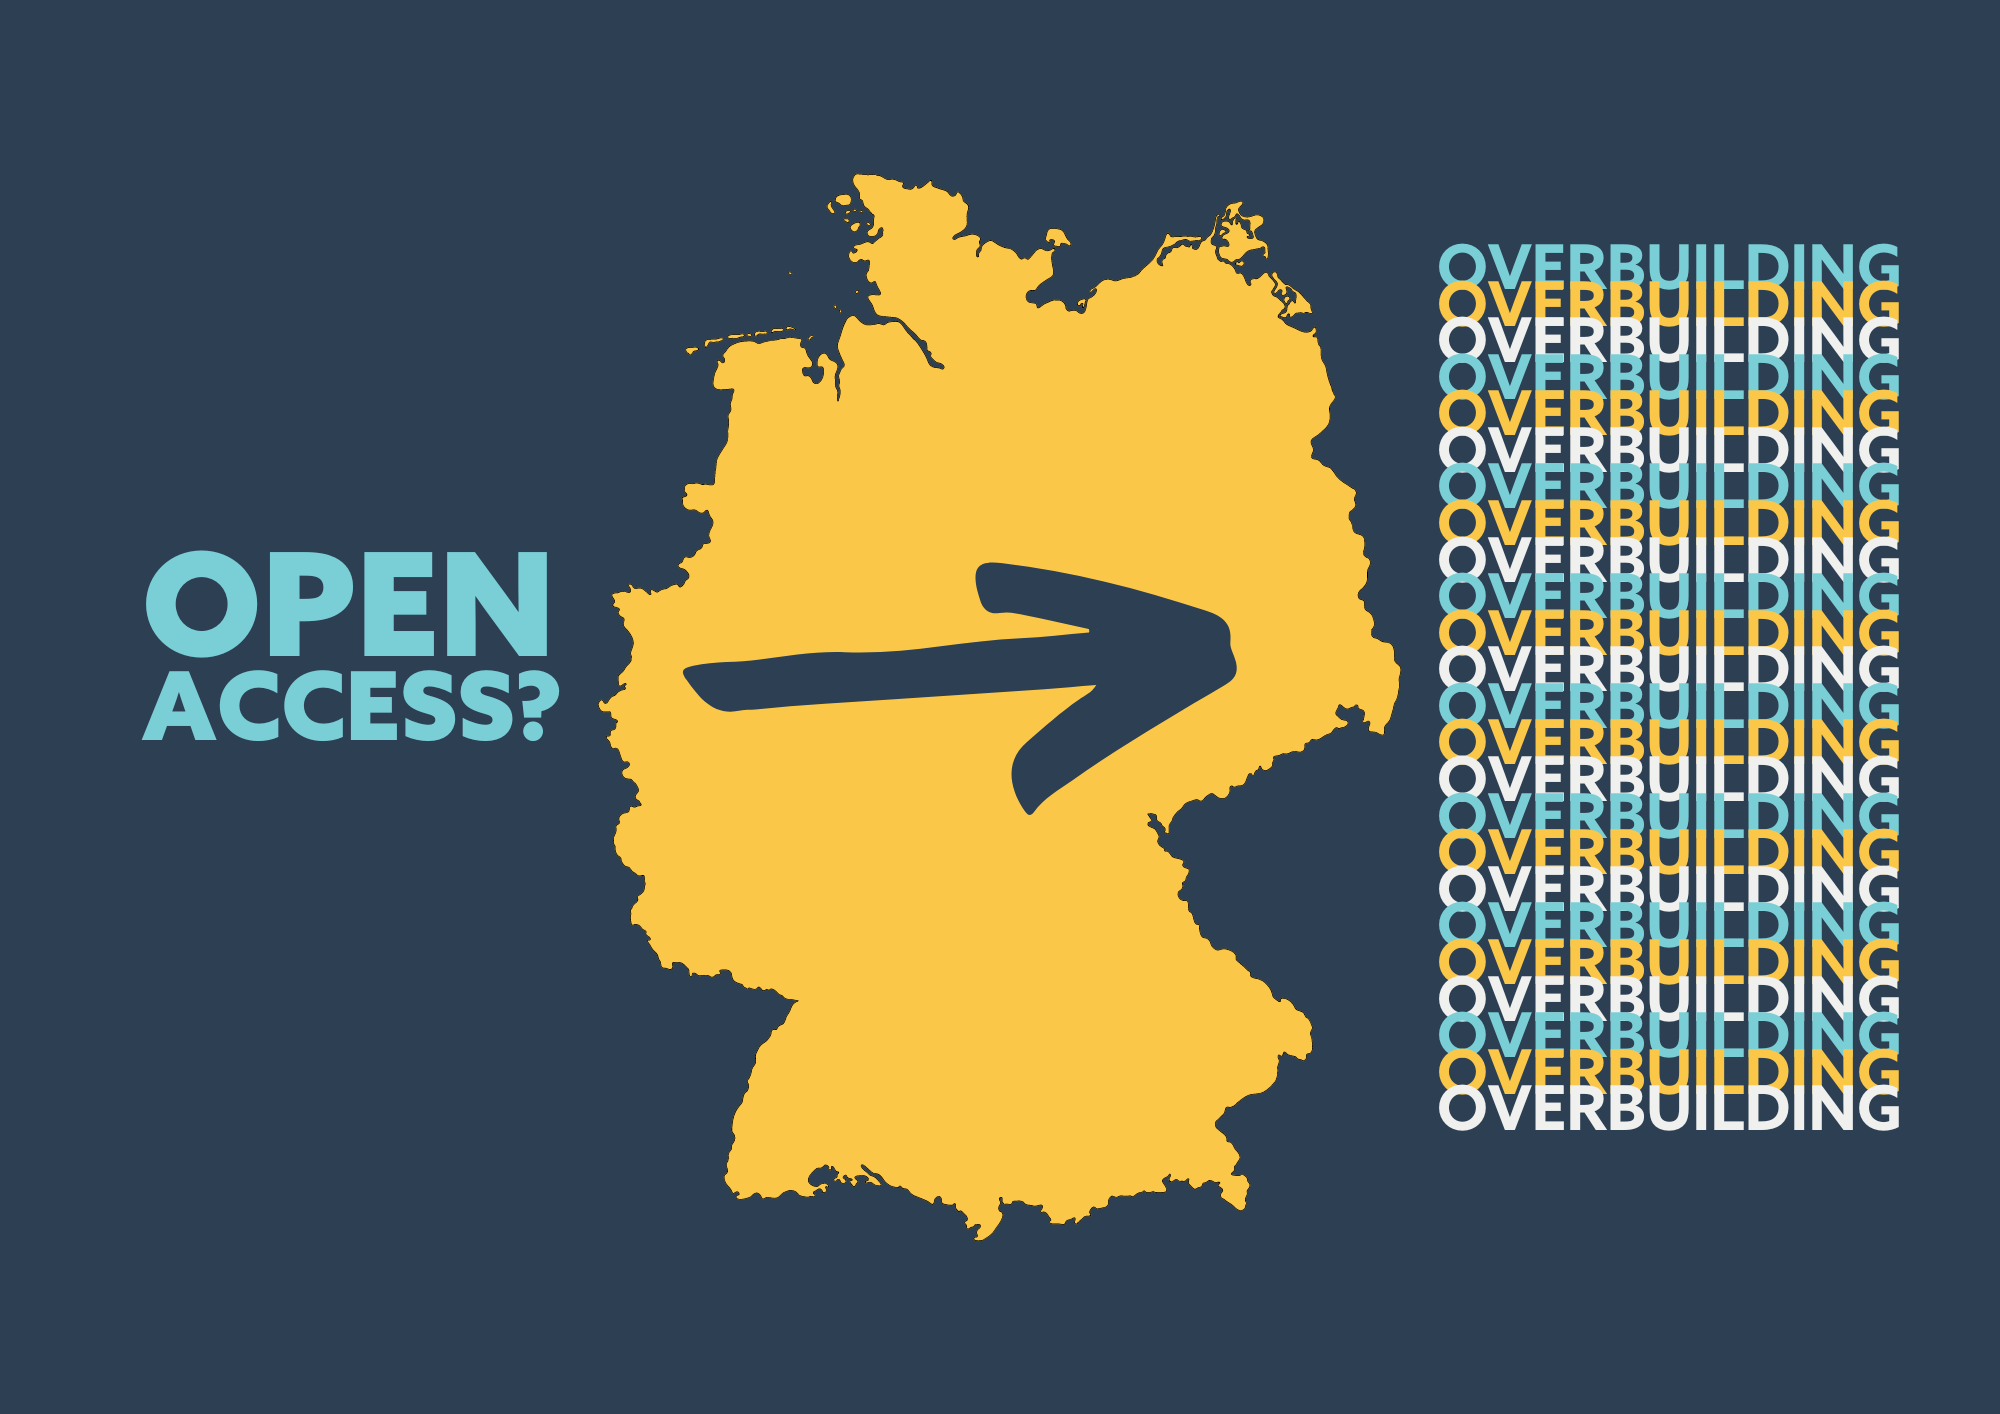 Open Access? Overbuilding! A glance at Germany